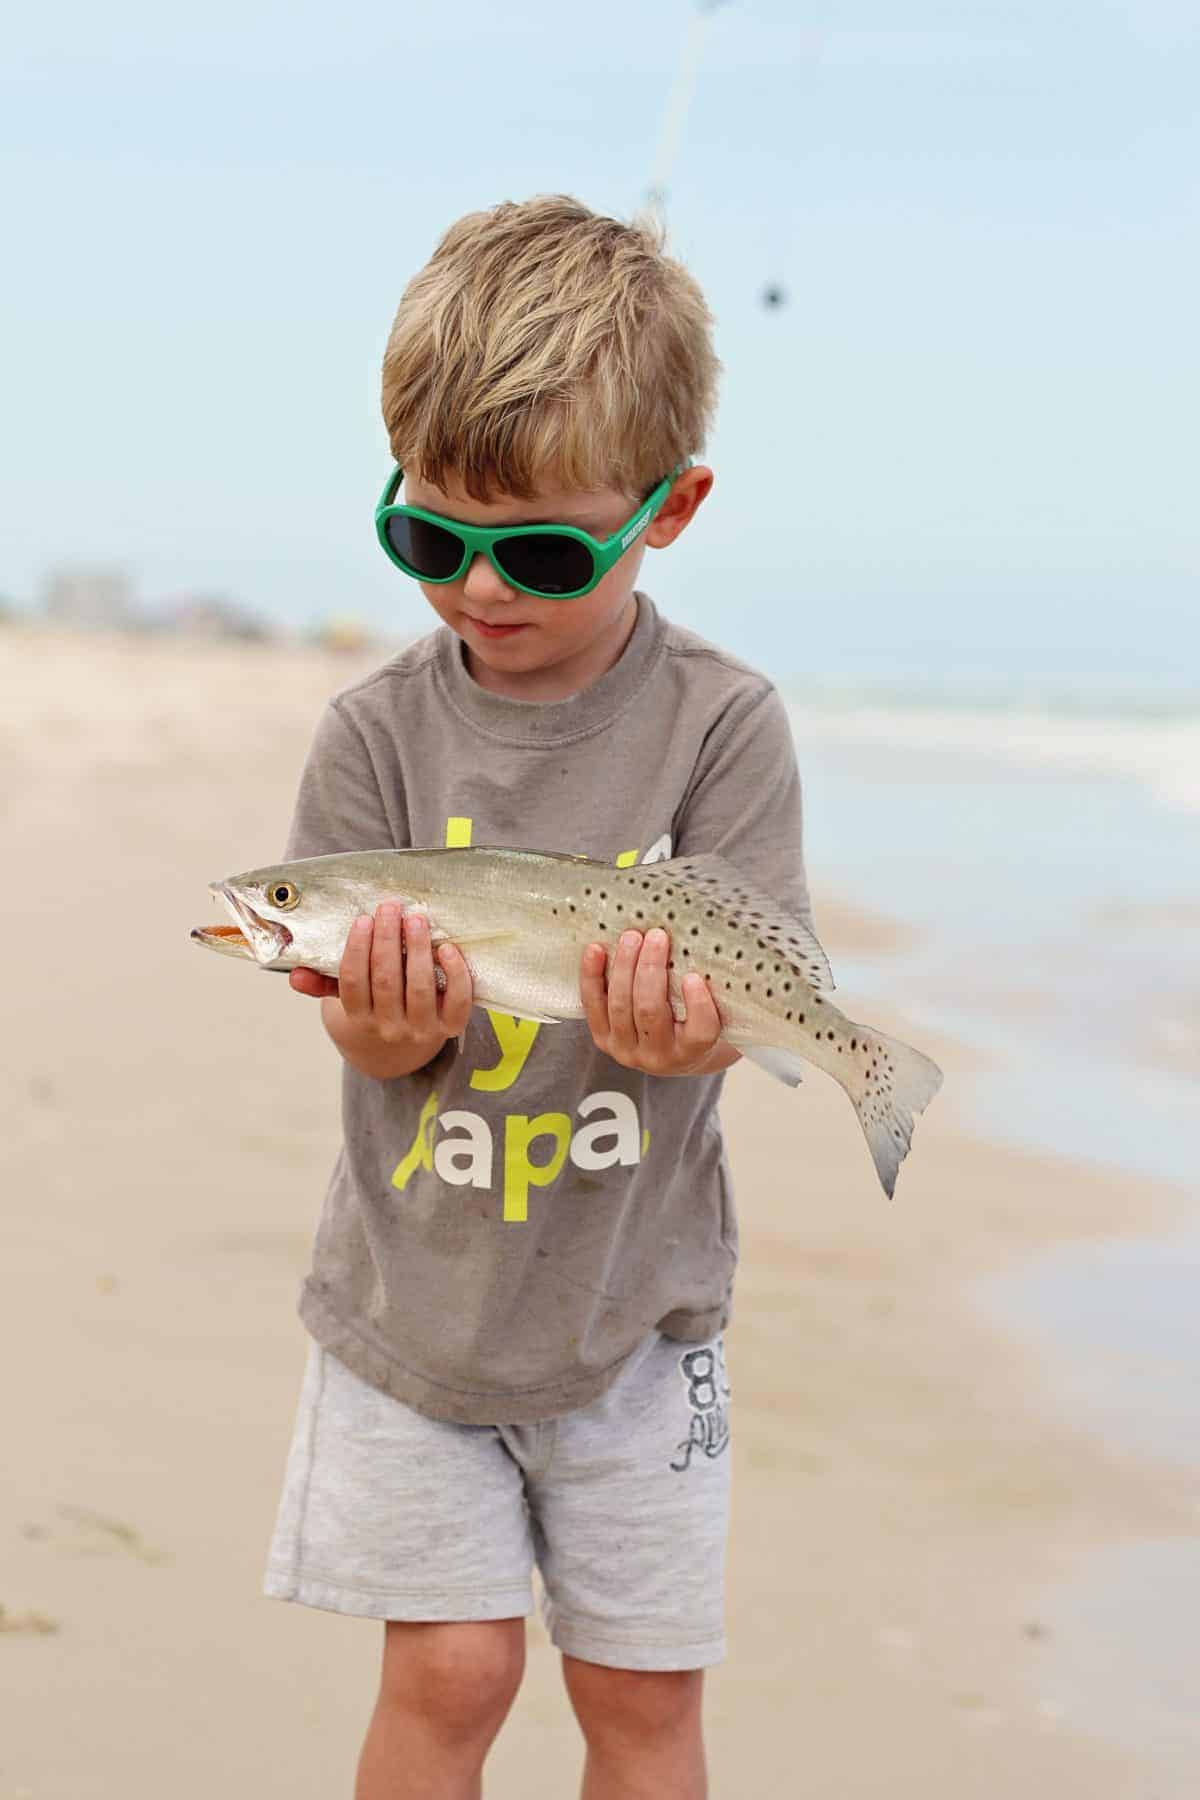 The Spirit of Fishing - Fishing Advice from a 6 Year Old